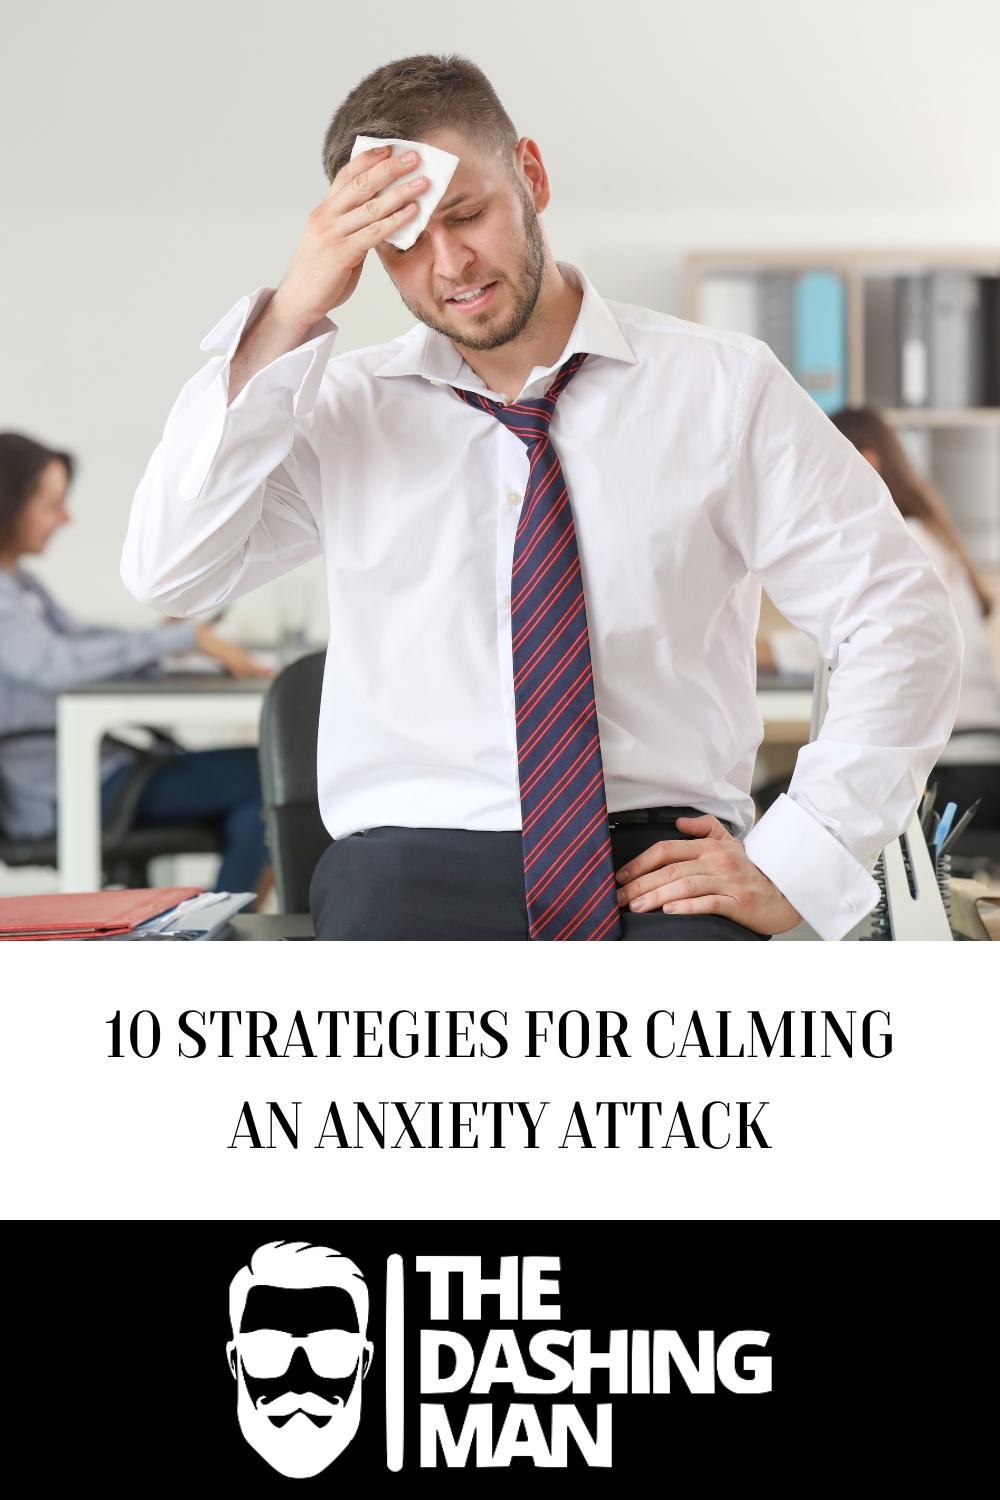 10 Ways On How to Calm an Anxiety Attack